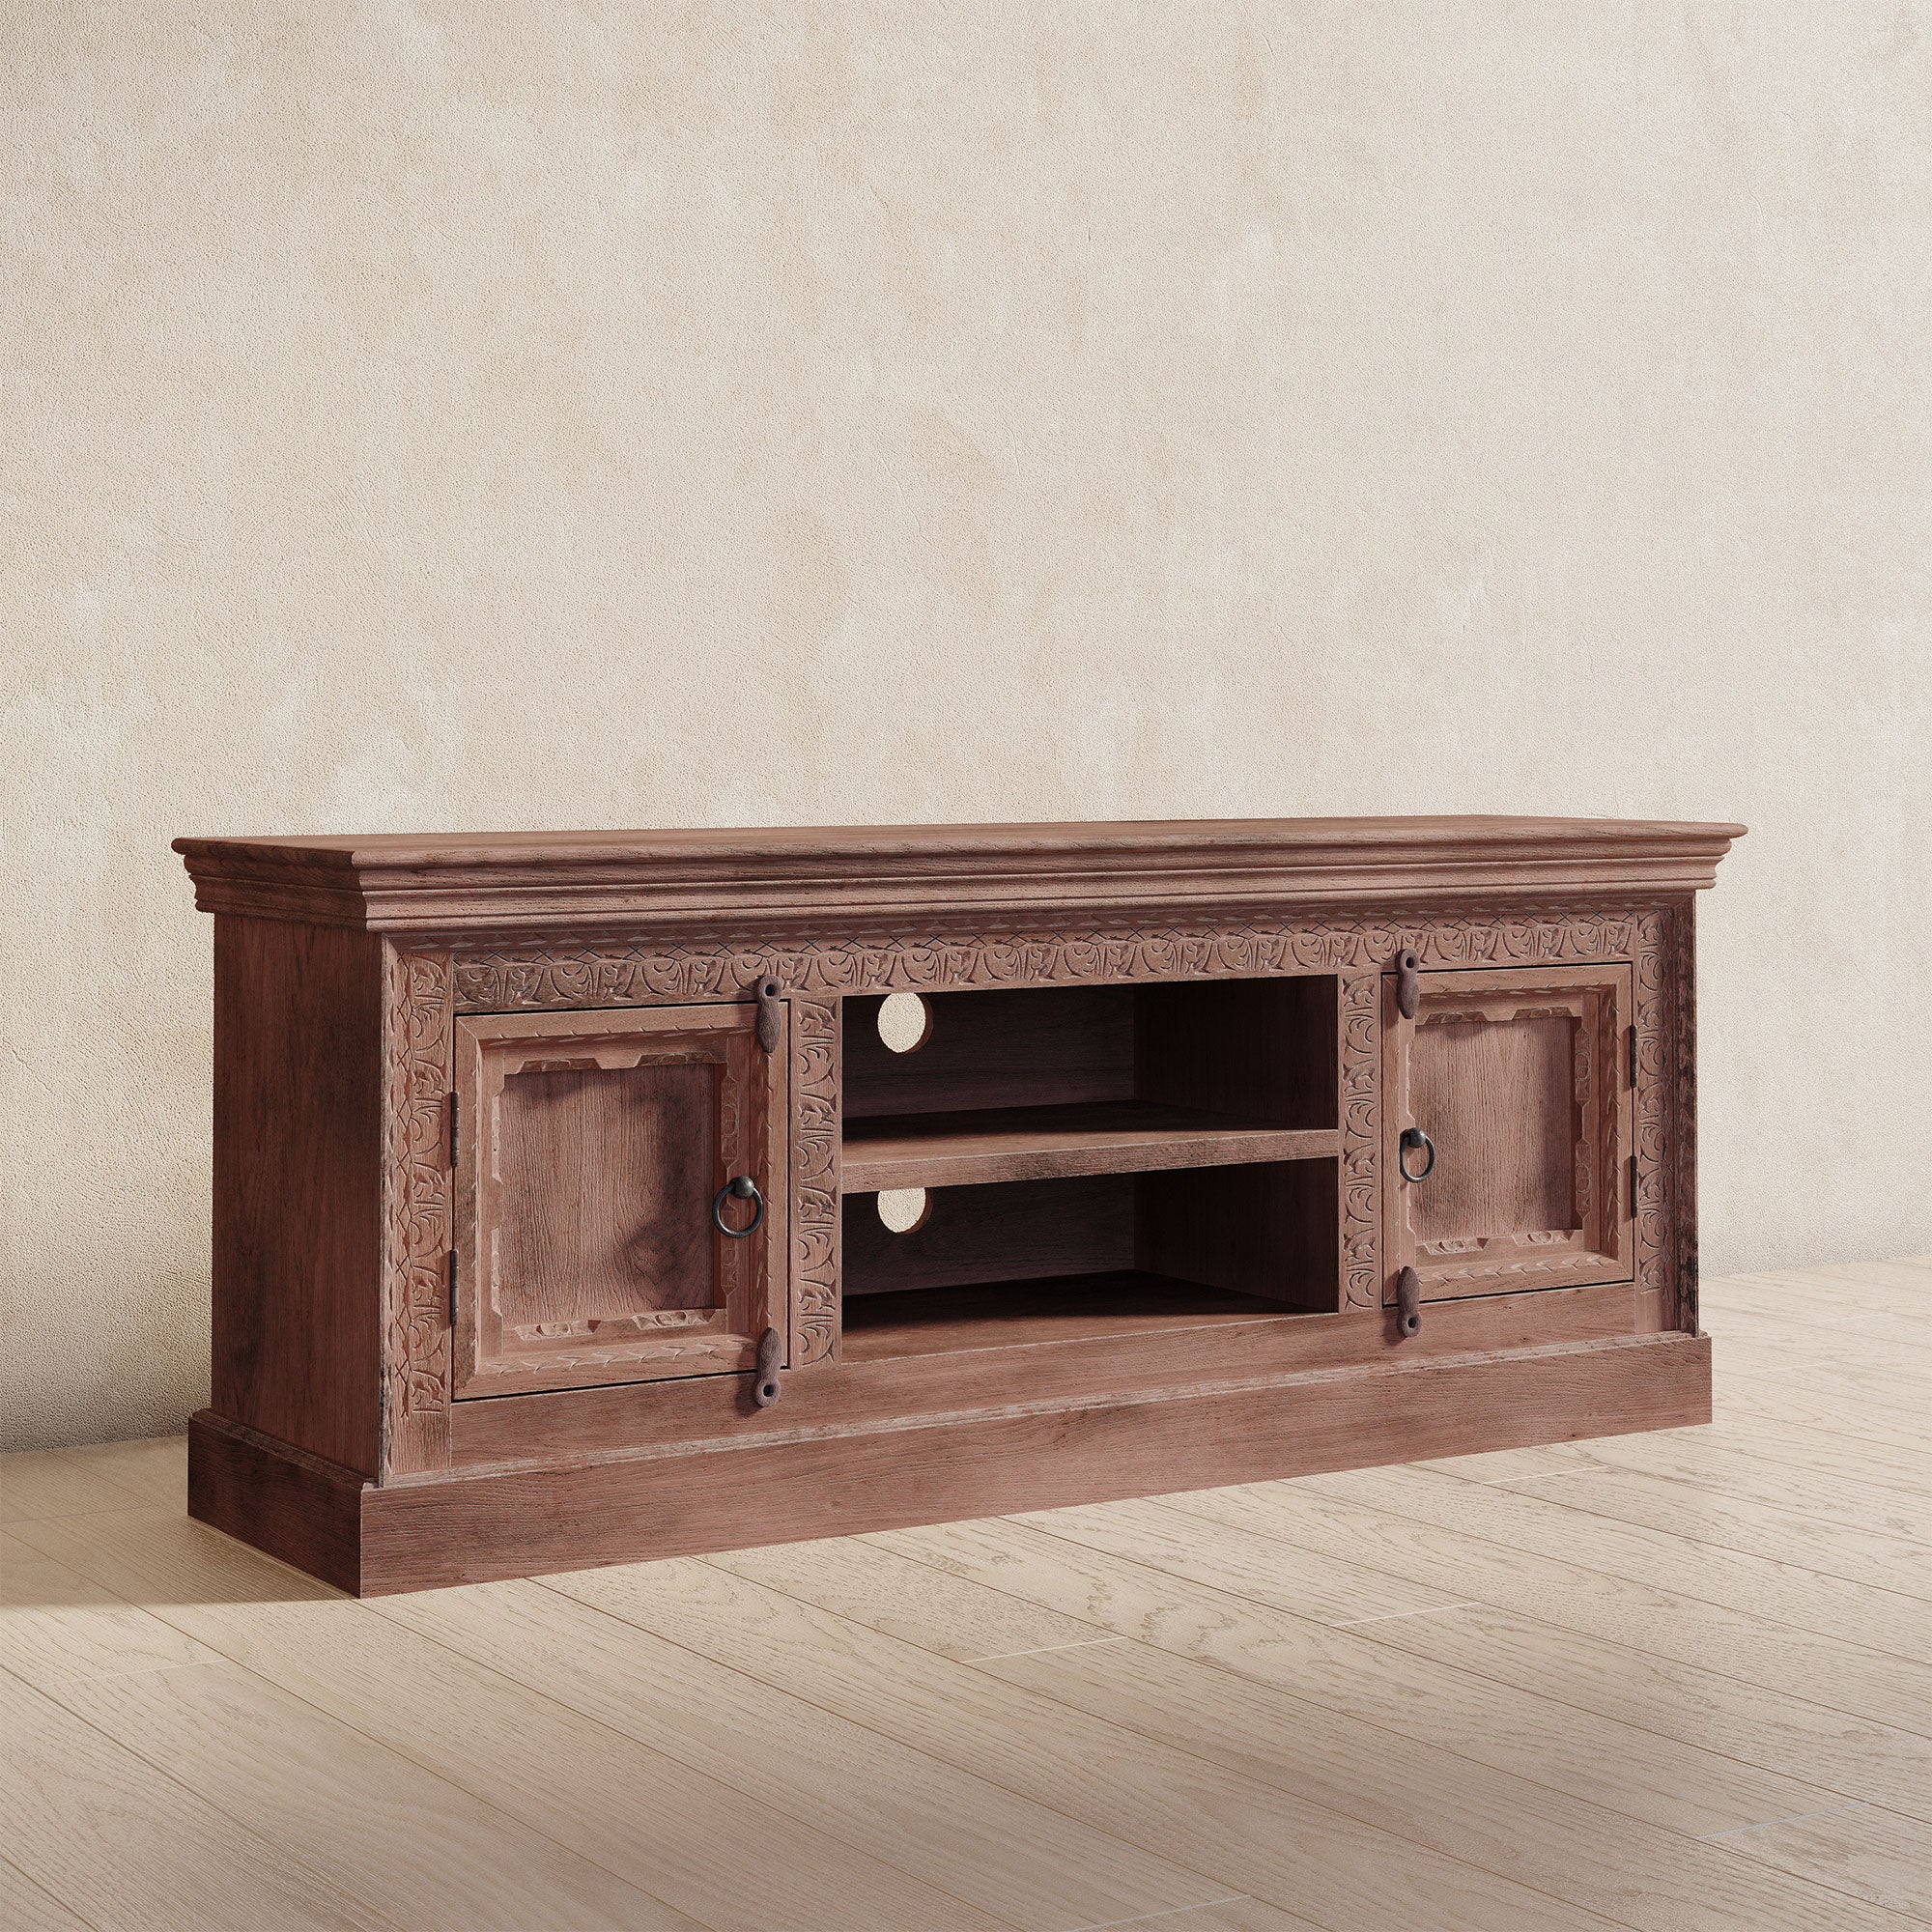 Mahala Nomad Wooden Media Unit in Distressed Brown Finish in Media Units by VMInnovations